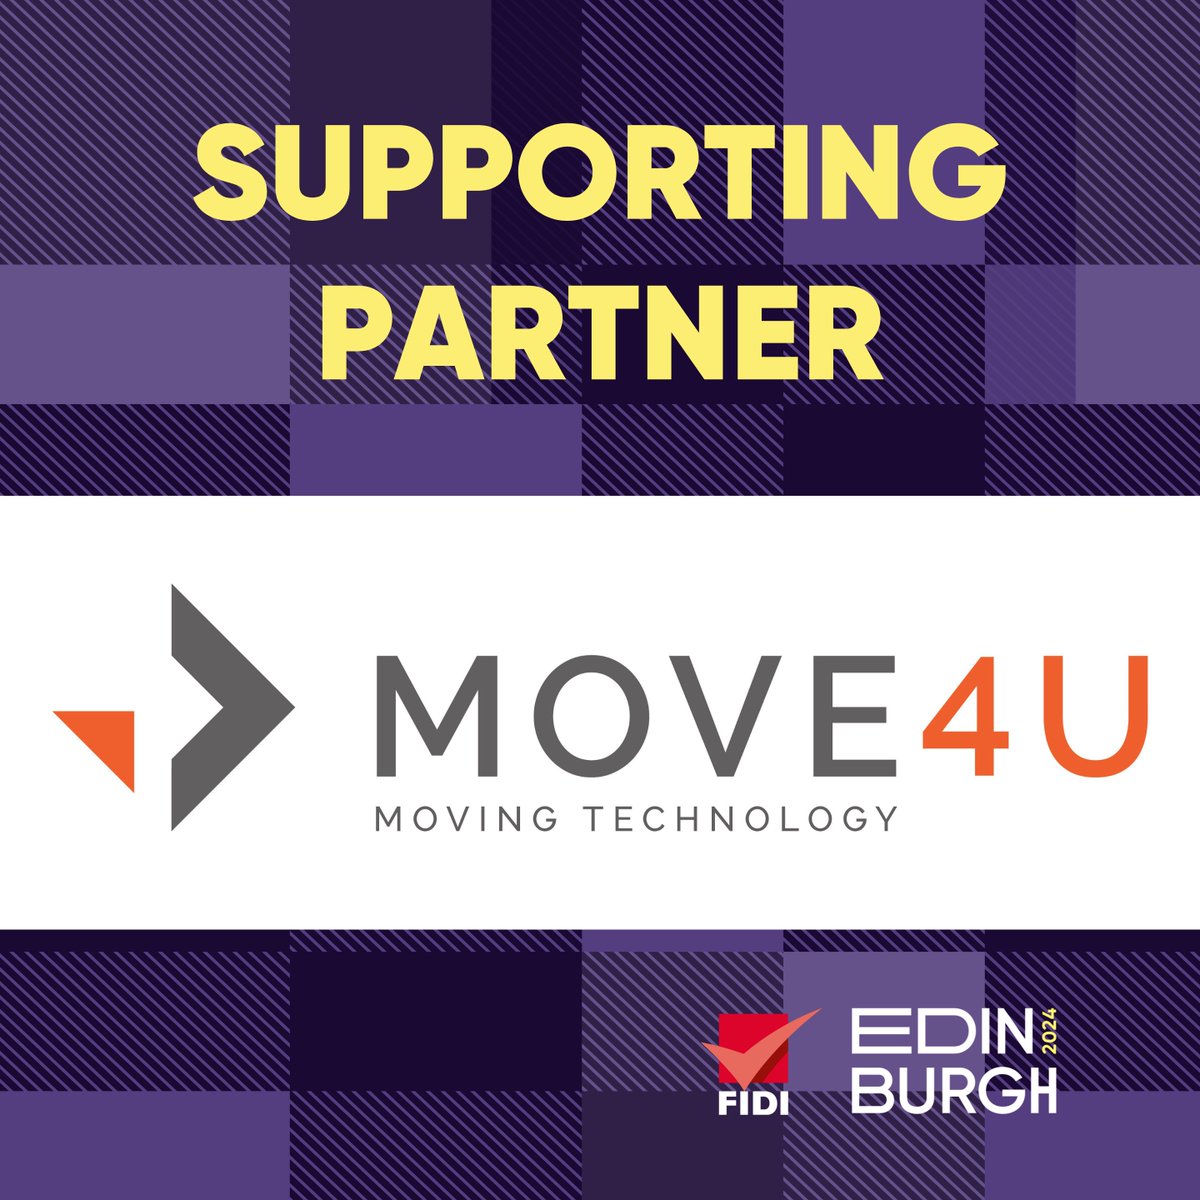 Thank you, @Move4uApps, for being a partner of the #2024FIDIconference in Edinburgh! Coming to the conference? Get the app to connect with attendees, book meetings & view your agenda : 🔶Google Play Store ➡ lnkd.in/e86wv6Jv 🔶Apple App Store ➡ lnkd.in/e7XJ6xun